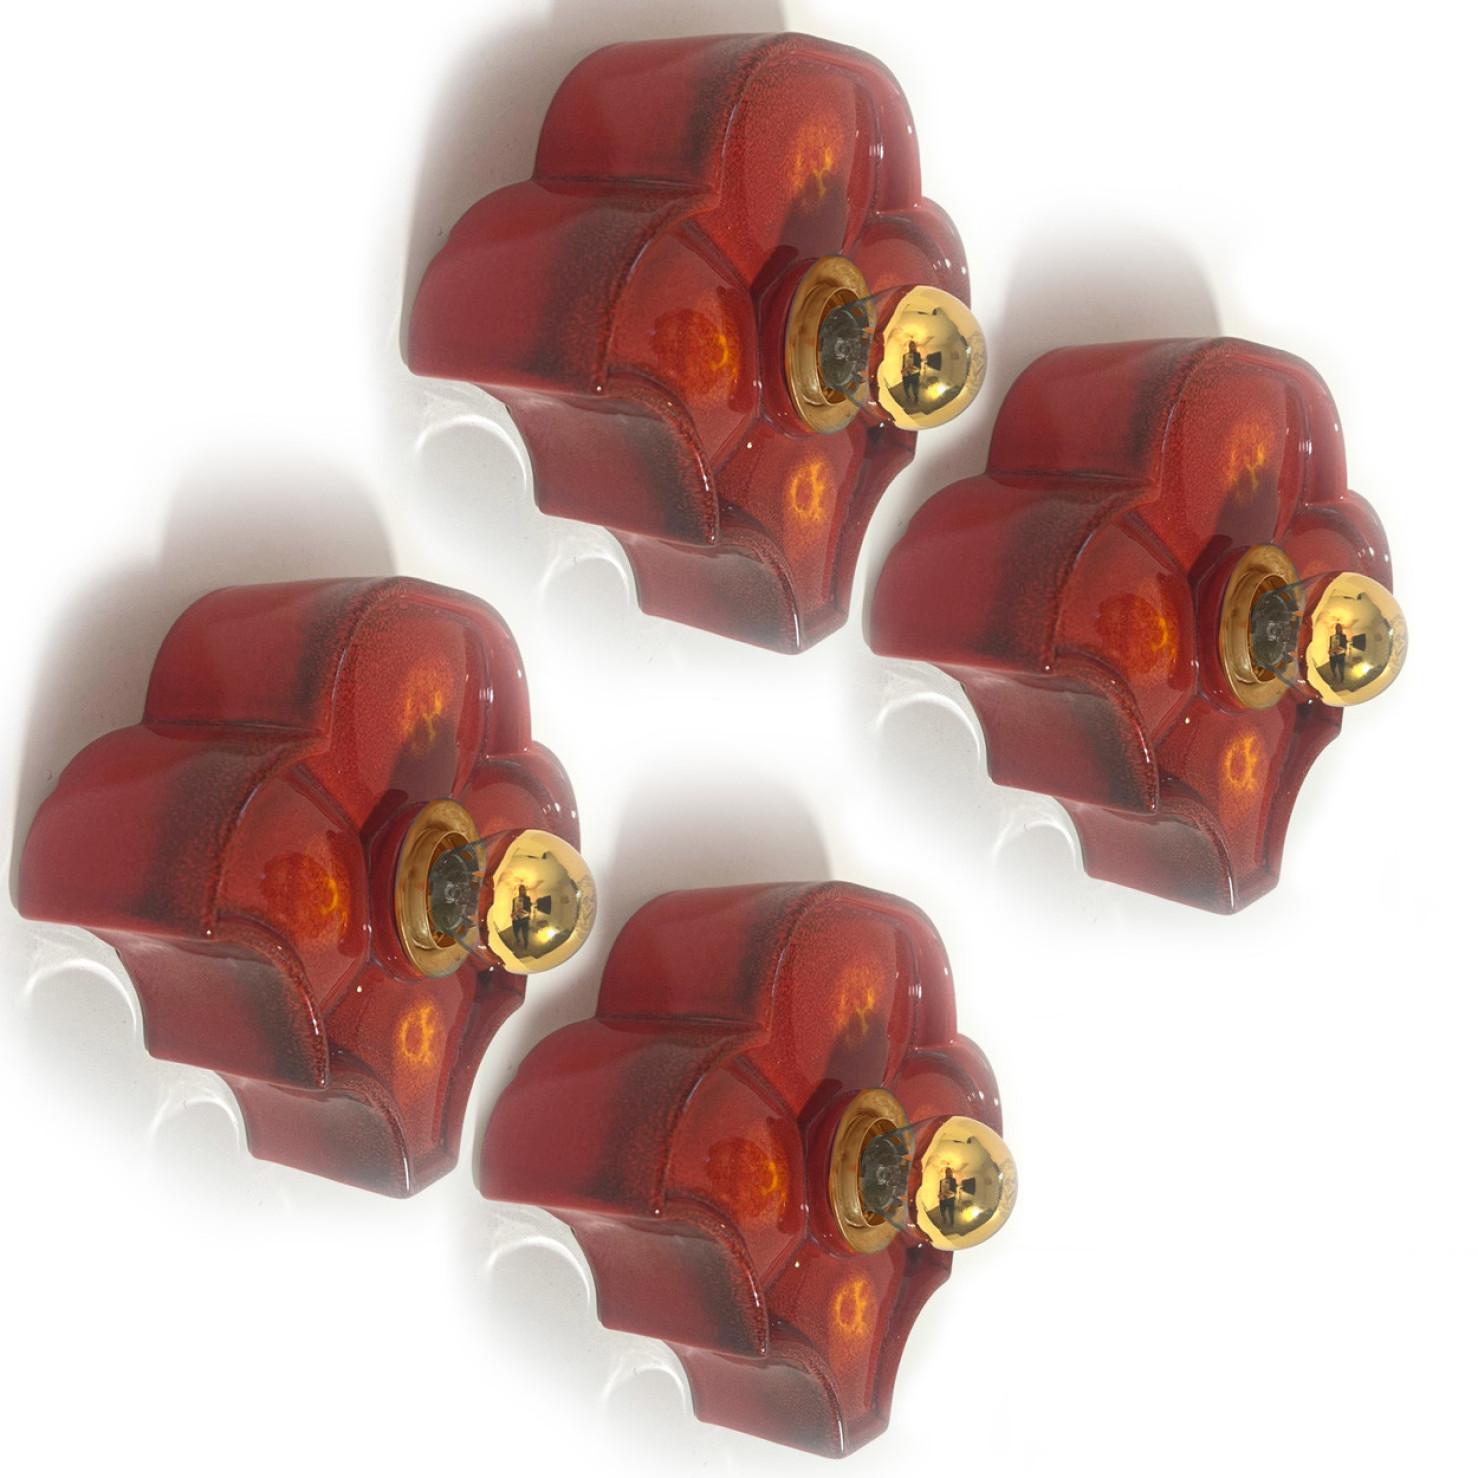 Several Flower Red Ceramic Wall Lights by Hustadt Keramik, Germany, 1970 For Sale 9